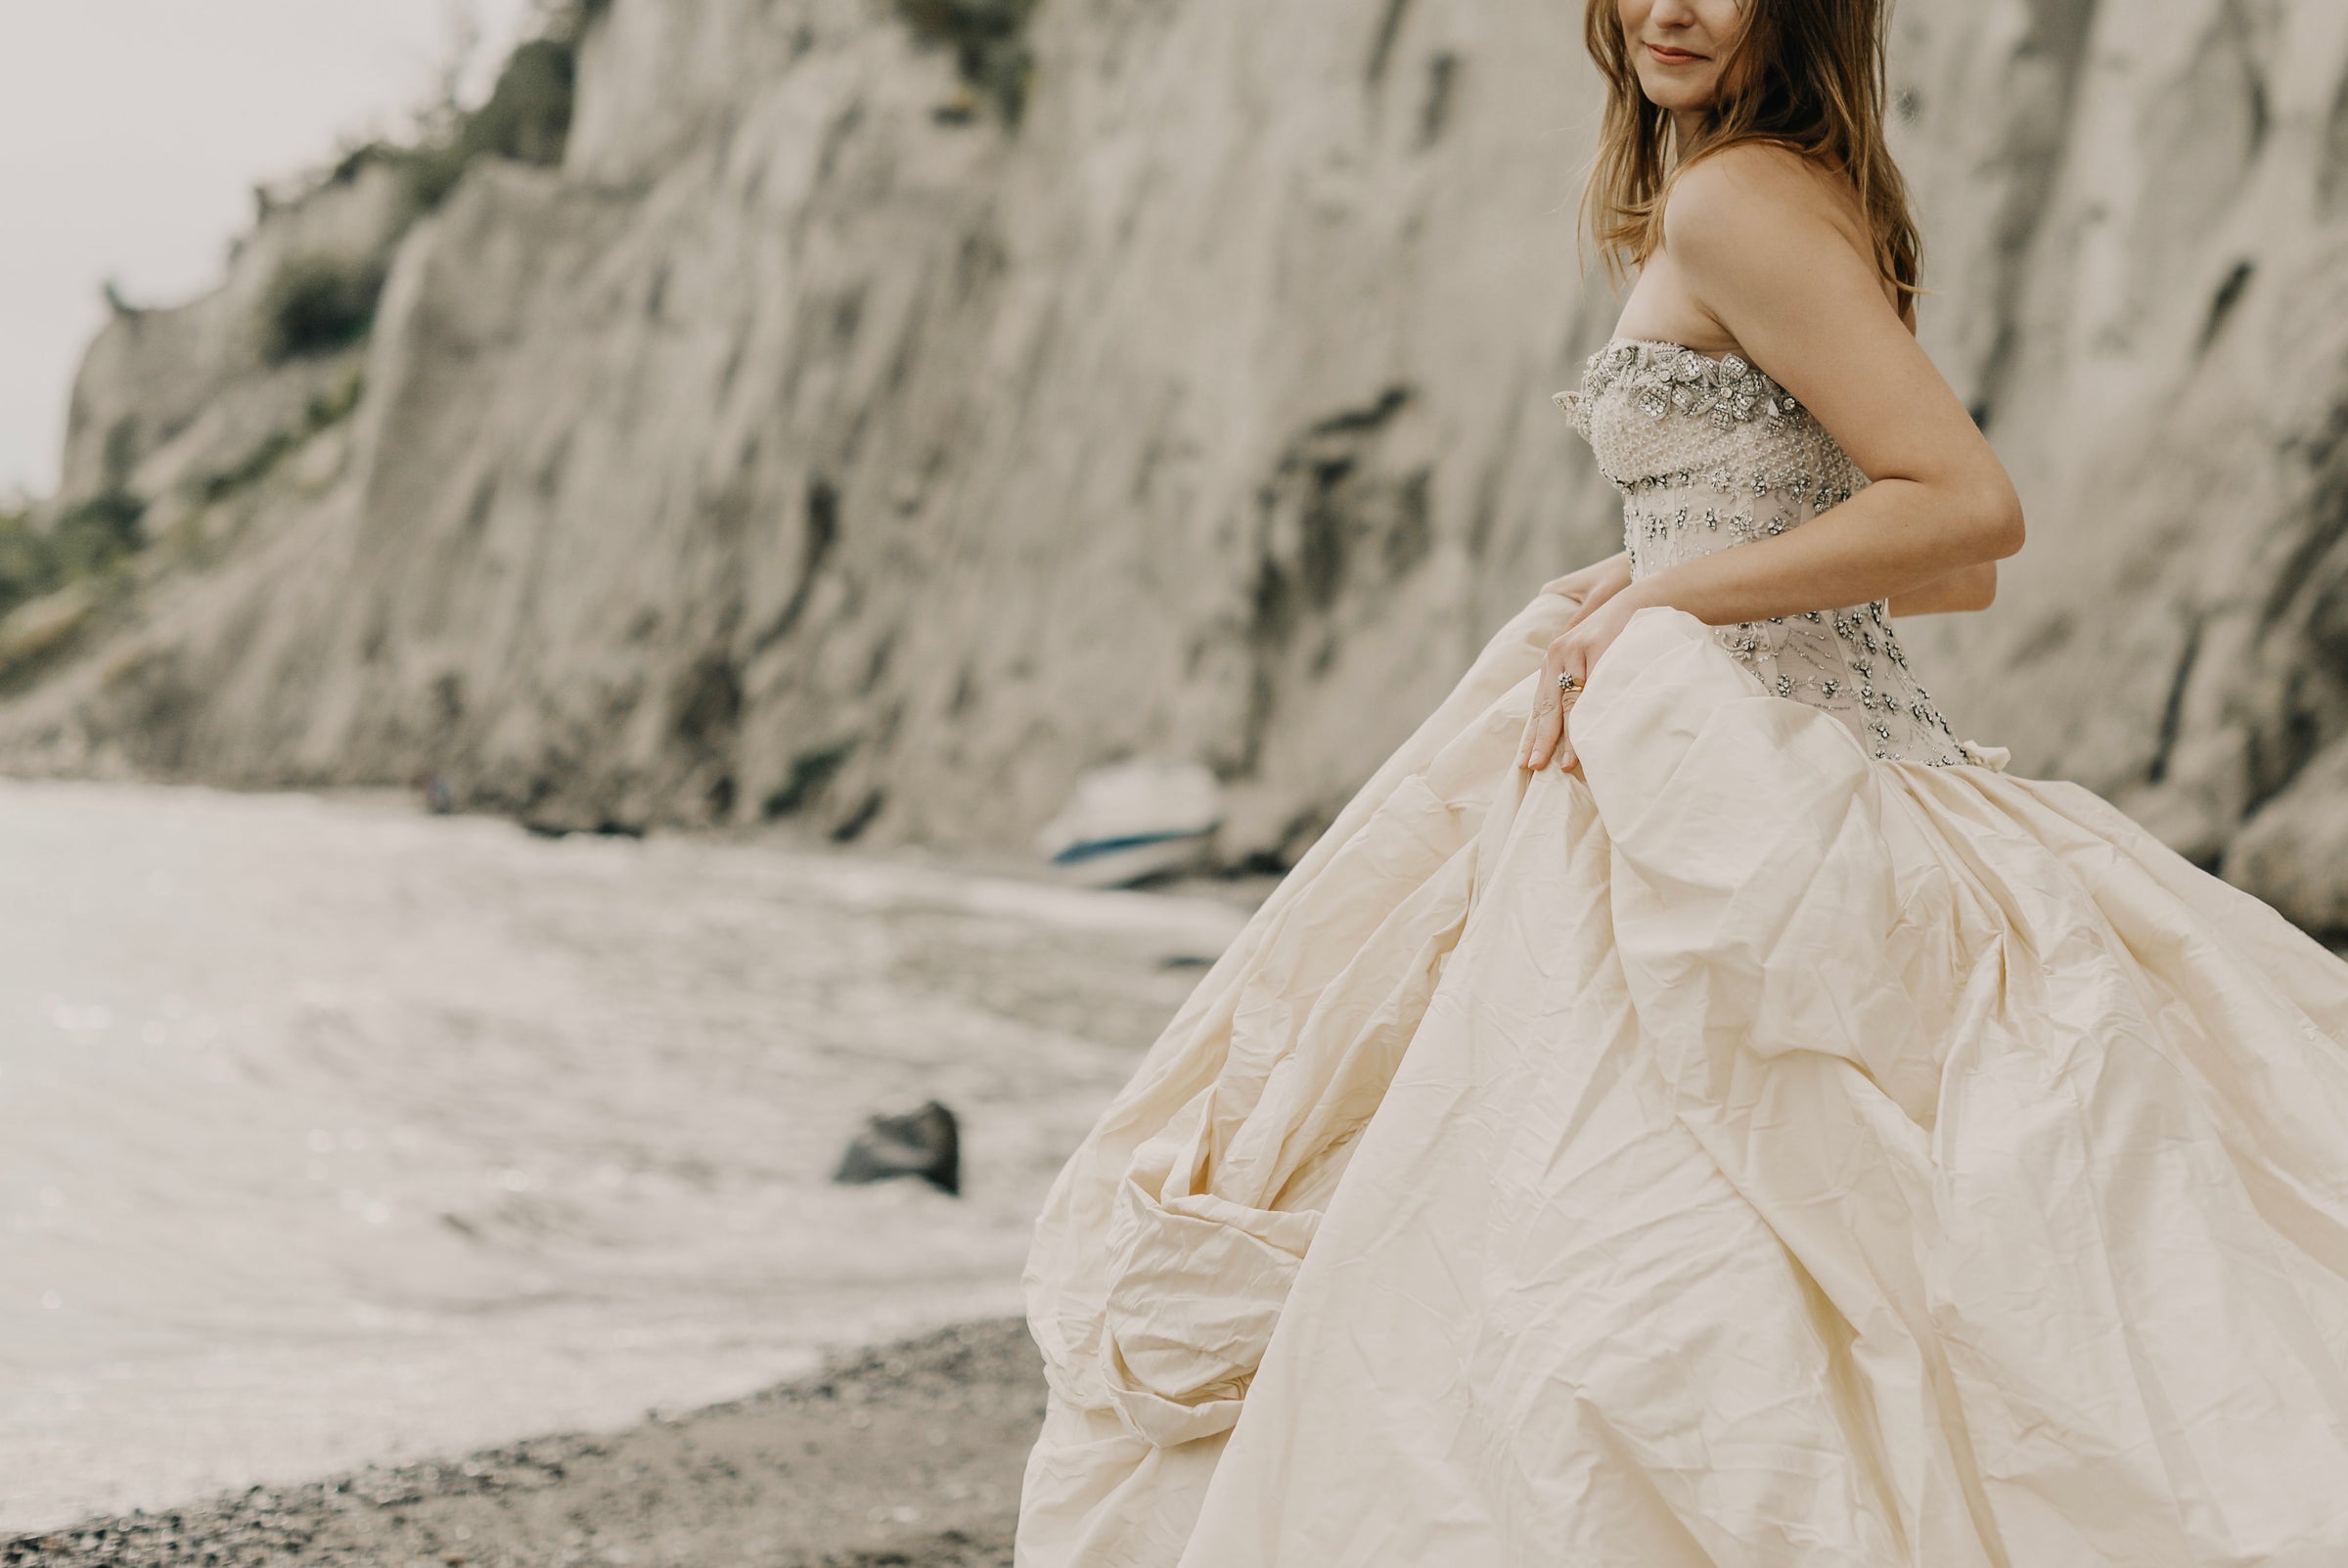 bride posing in designer wedding dress with beaded corset and large puffy skirt on the sands of a beach